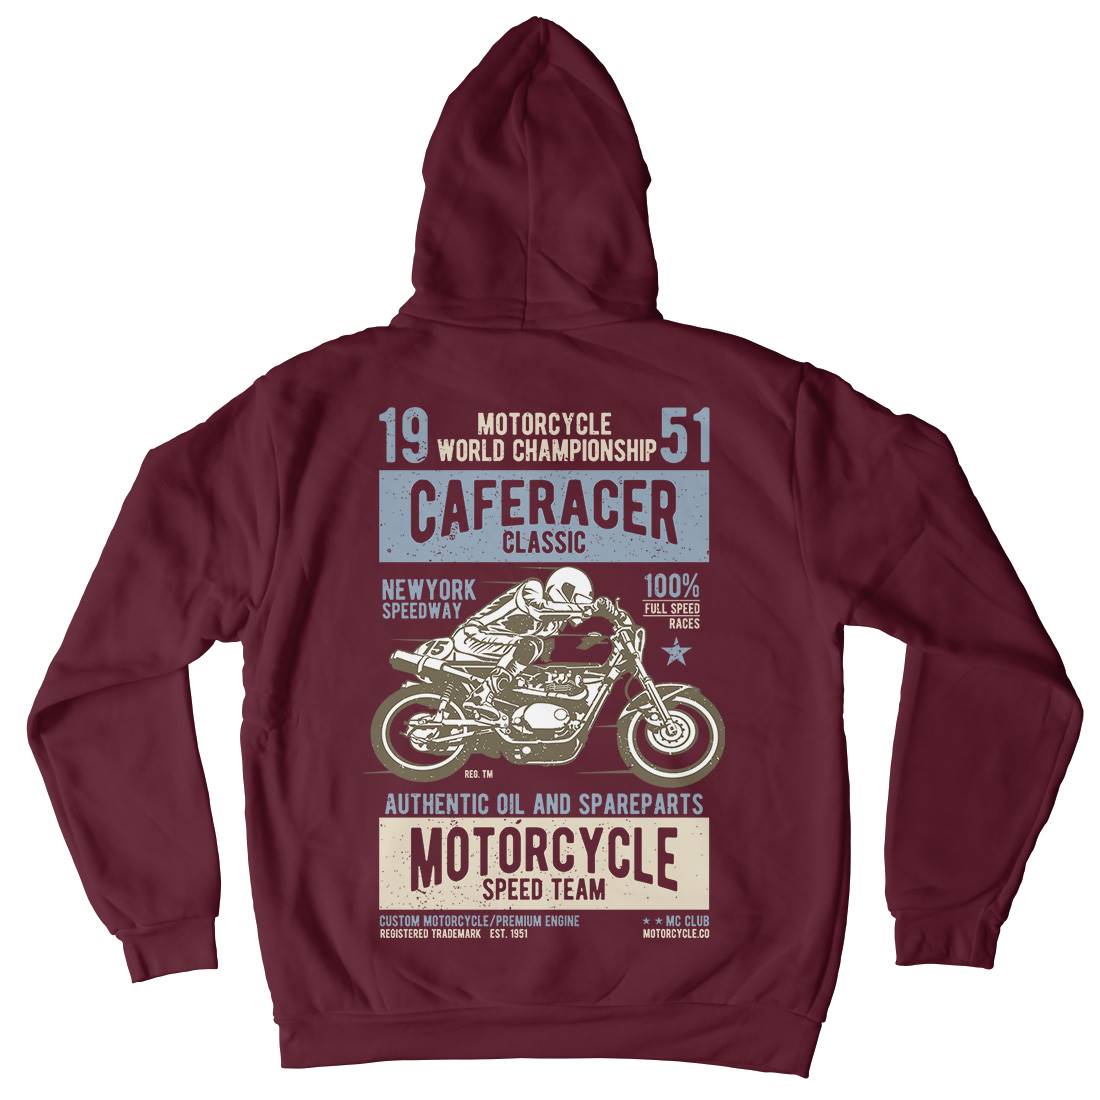 Caferacer Kids Crew Neck Hoodie Motorcycles A629